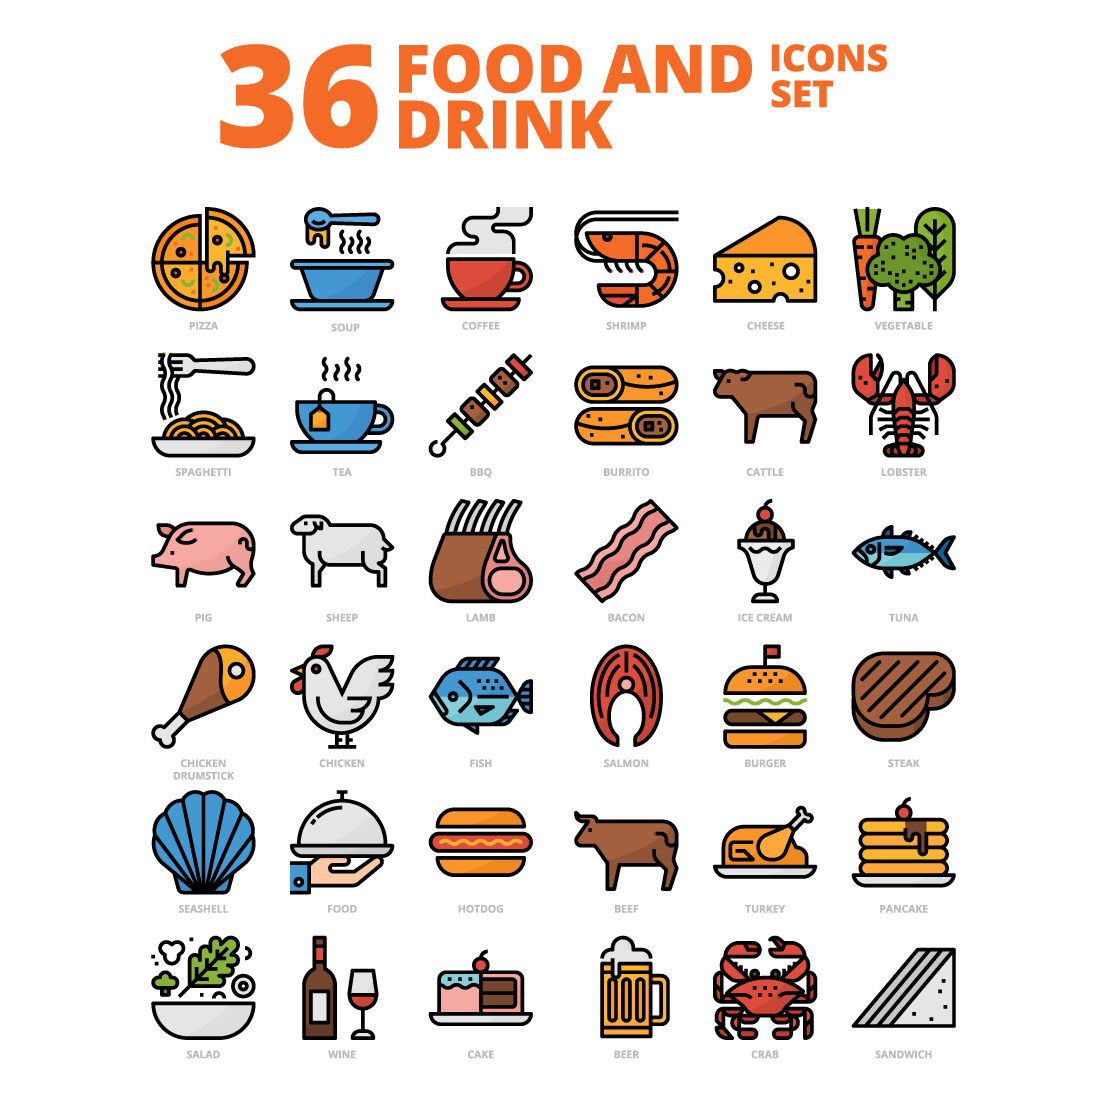 36 Food Icons Set x 4 Styles cover image.